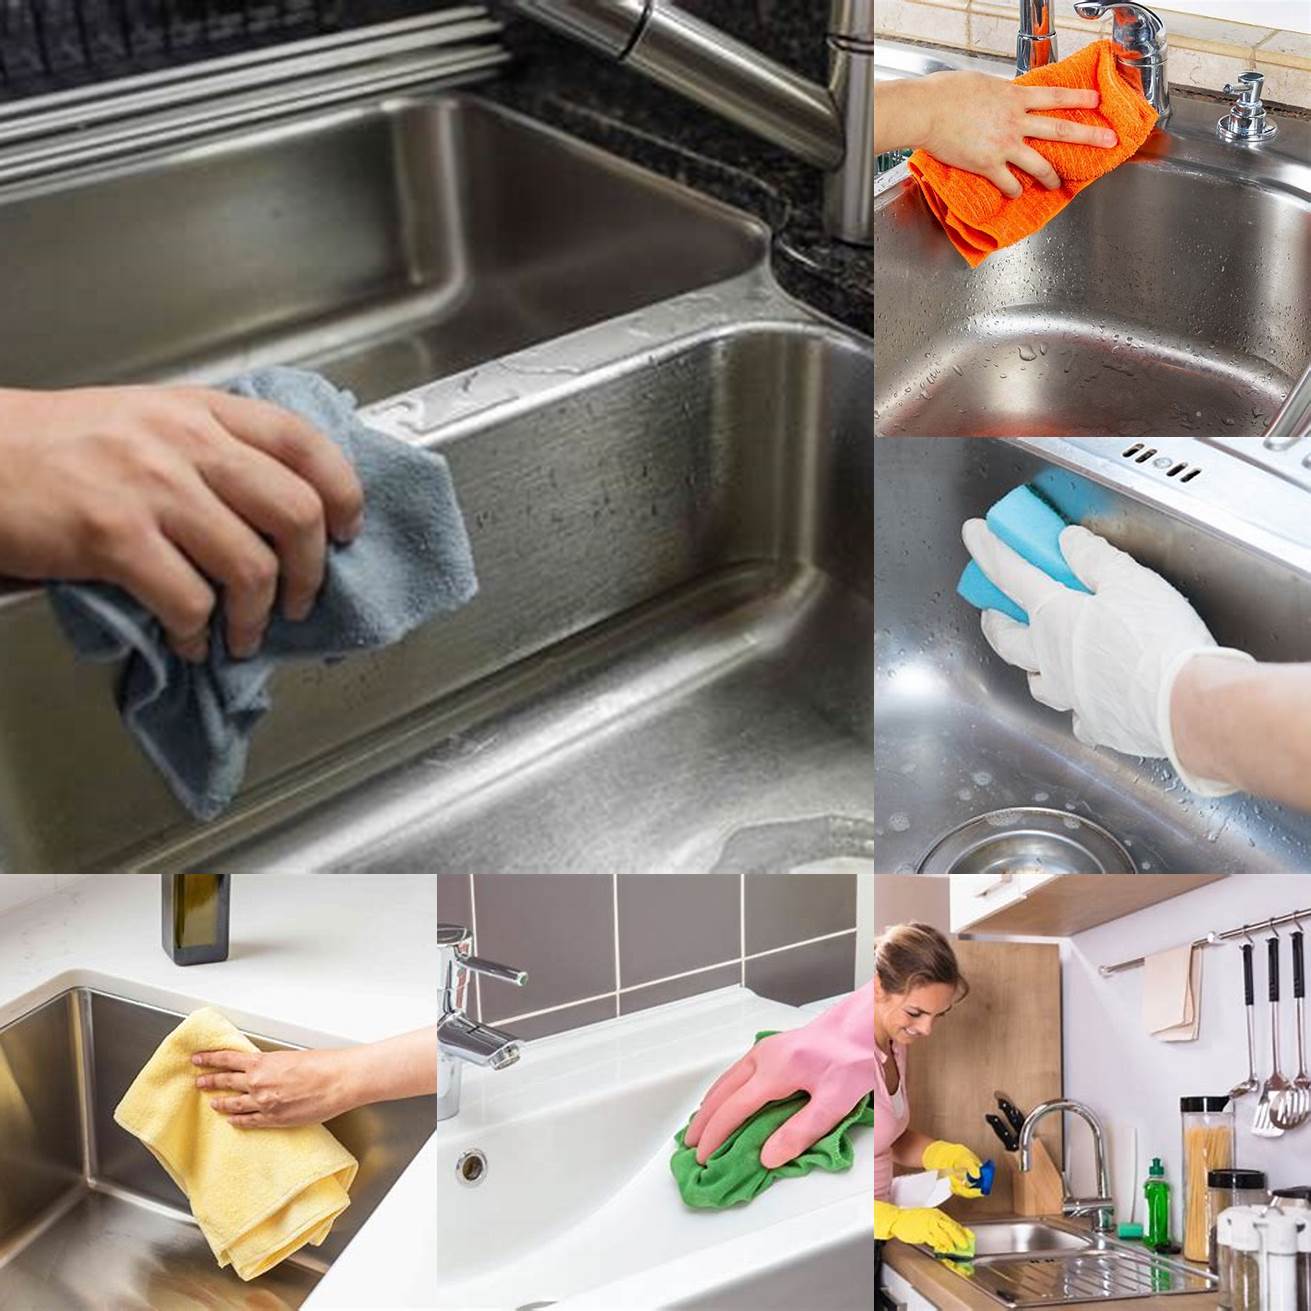 Wipe down the sink with soap and water after each use to prevent water spots and stains from setting in